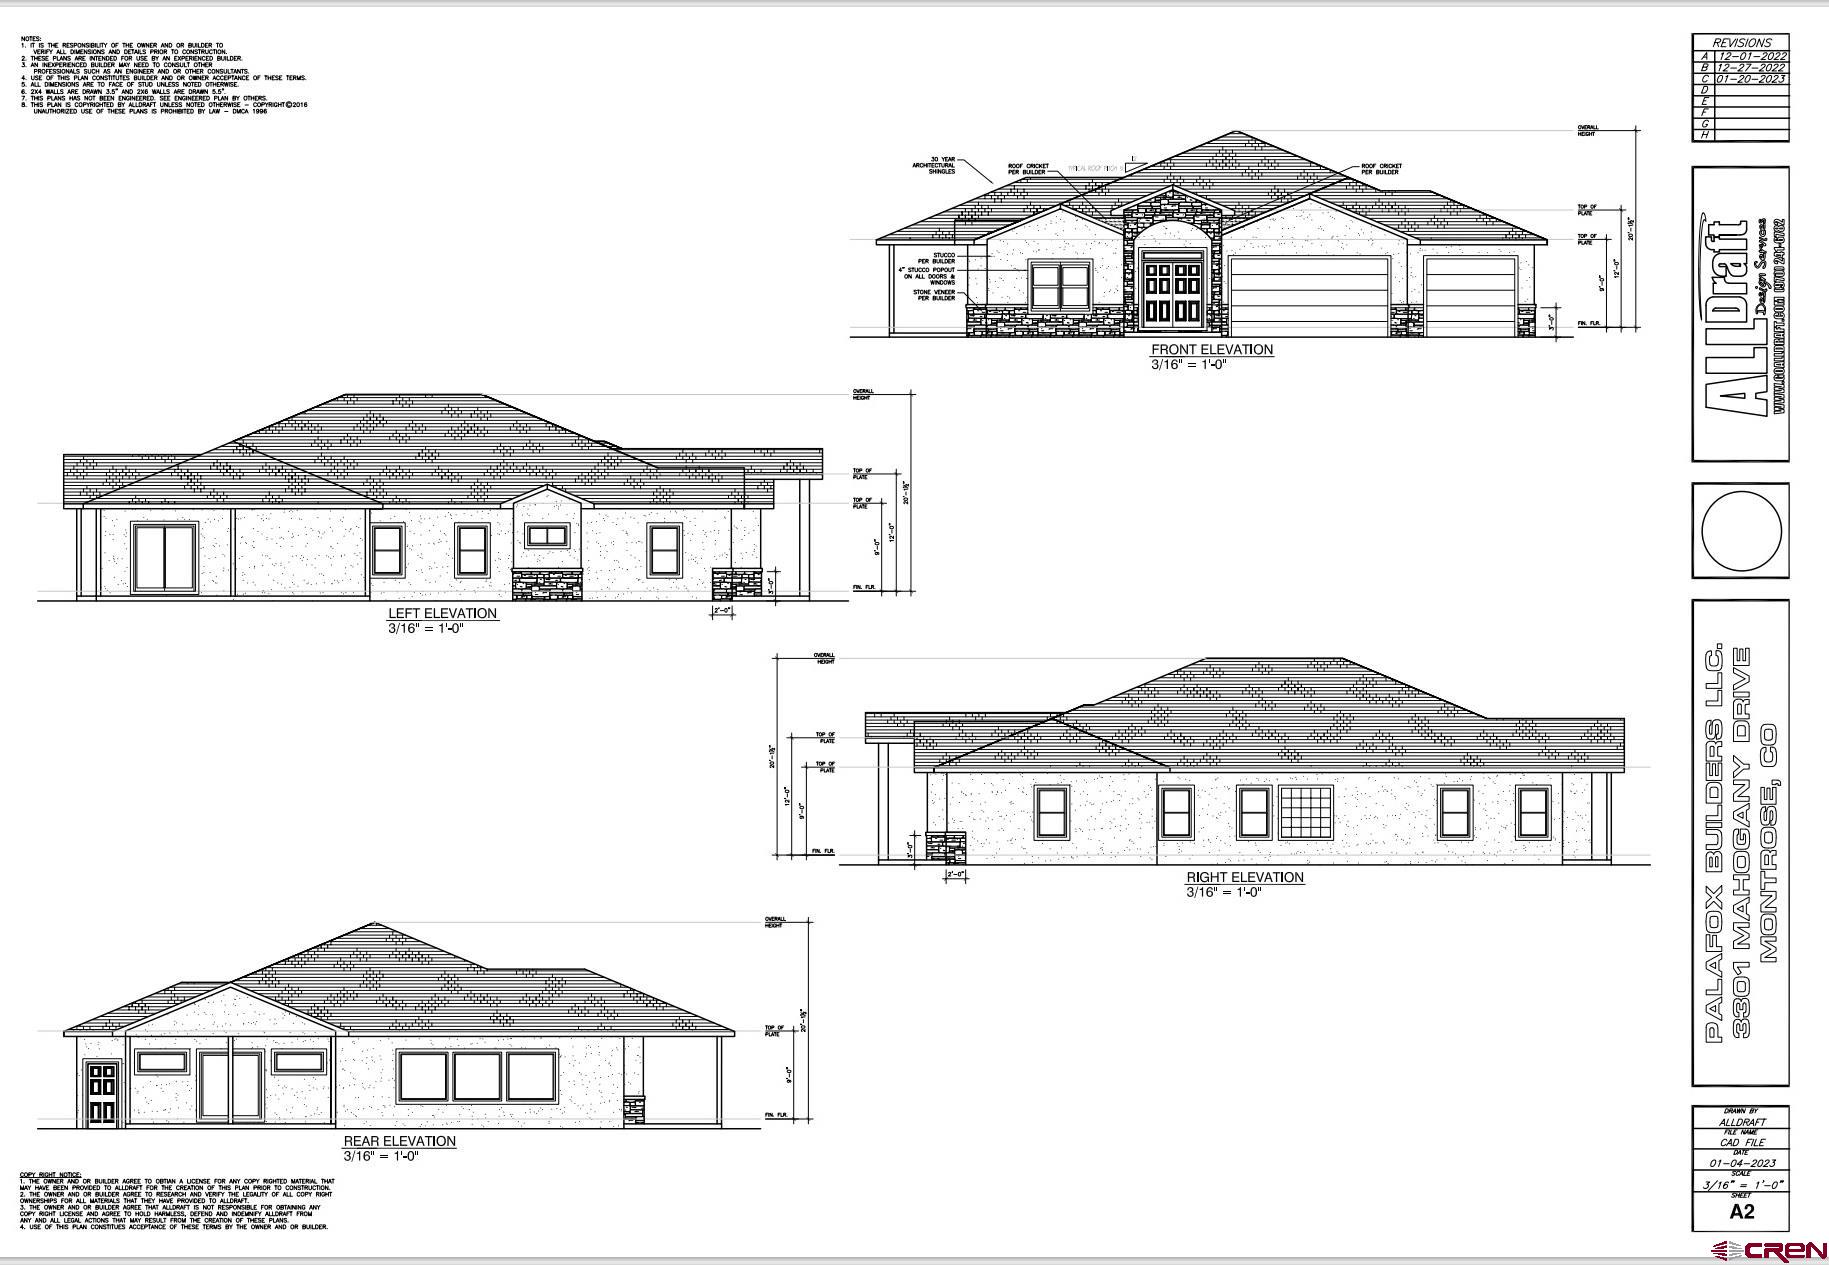 Perfect opportunity to own property in Brown Ranch with some of the most amazing views as well as common area on two sides of this lot. The 3 bed/2.5 bath with office/4th bedroom has already been approved by the HOA. SEE Floorplan in photos. Construction will only begin once a Buyer has been obtained and the Builders Contract has been executed.  Estimated completion will be approximately 6 months from contract which gives the Buyer the capability of customizing the finishes on this beautiful floorplan. Call today for more information!